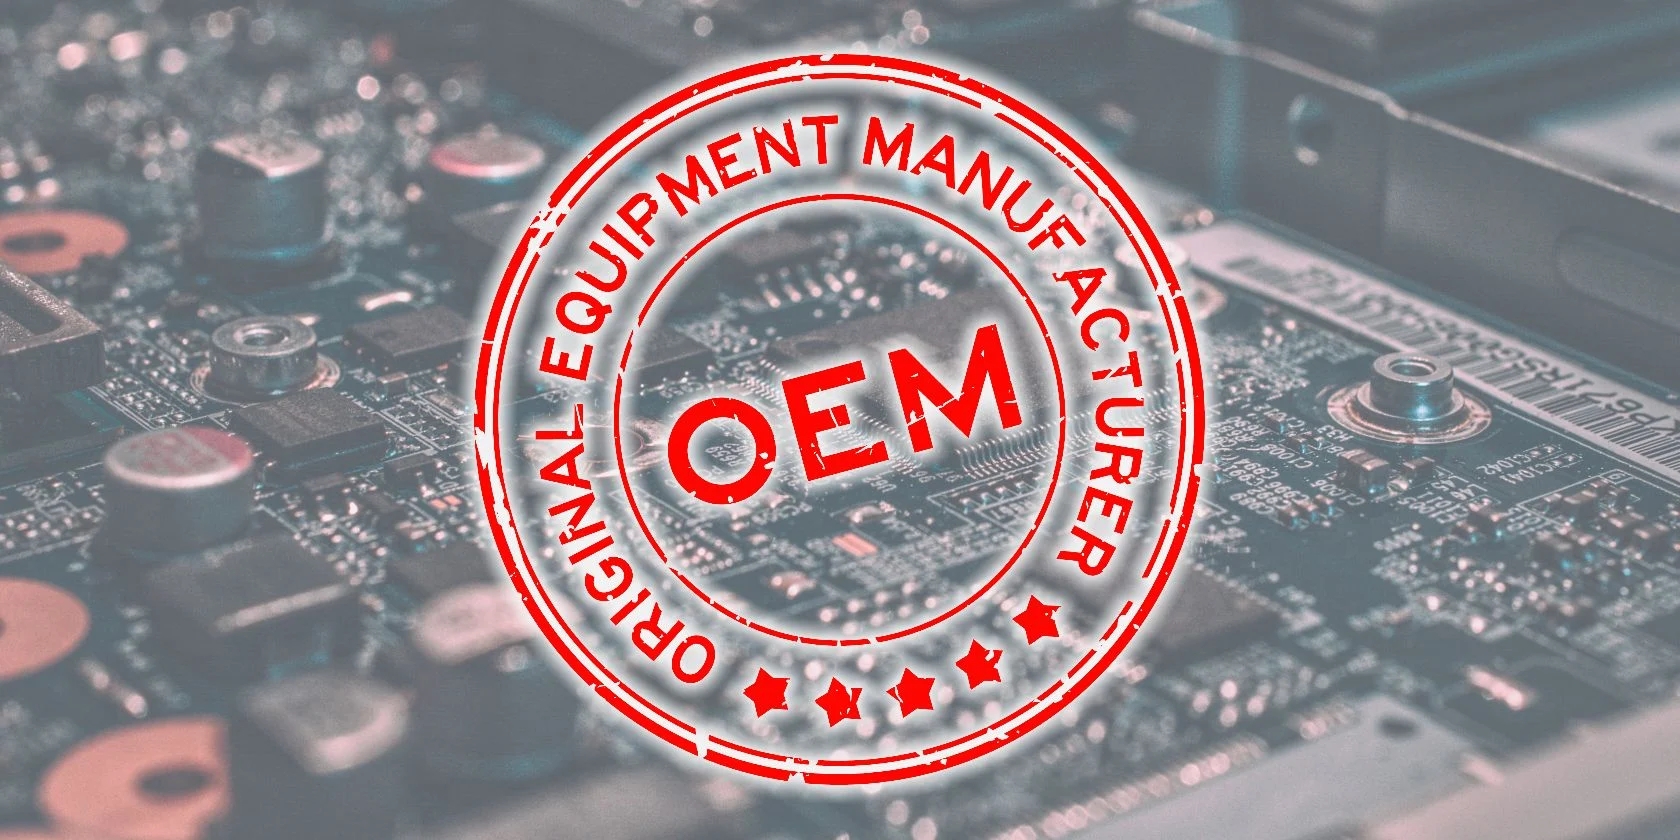 What Is the Major Difference Between OEM and Aftermarket Parts?